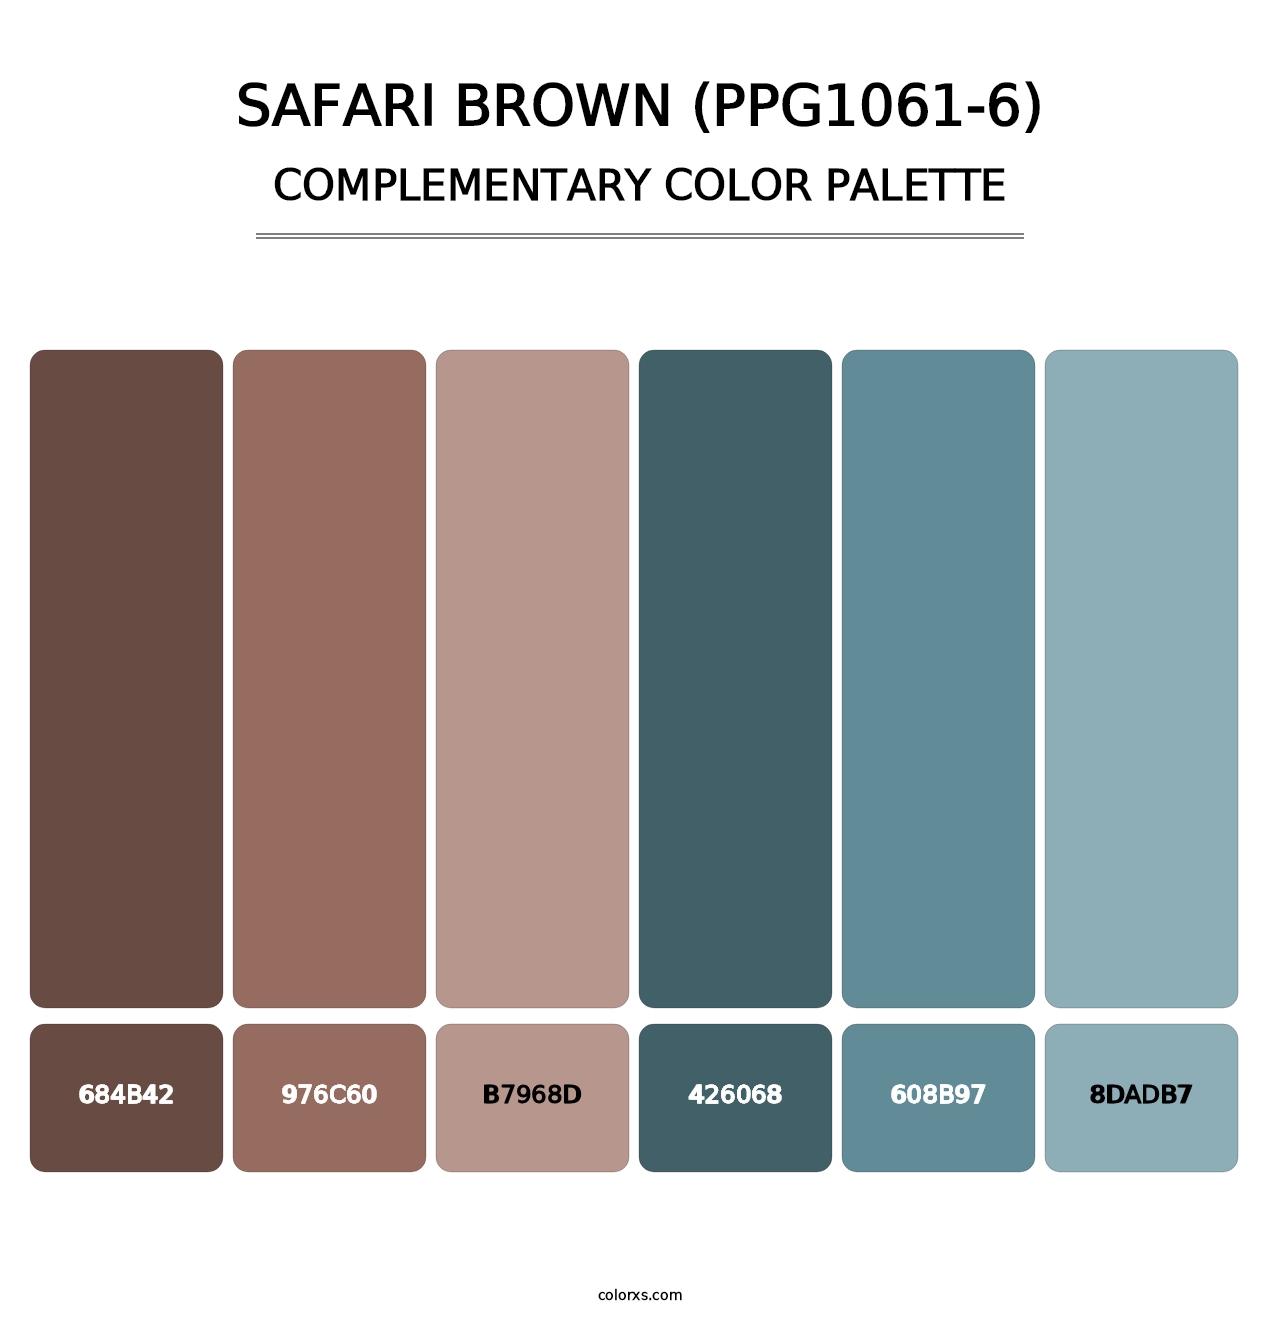 Safari Brown (PPG1061-6) - Complementary Color Palette